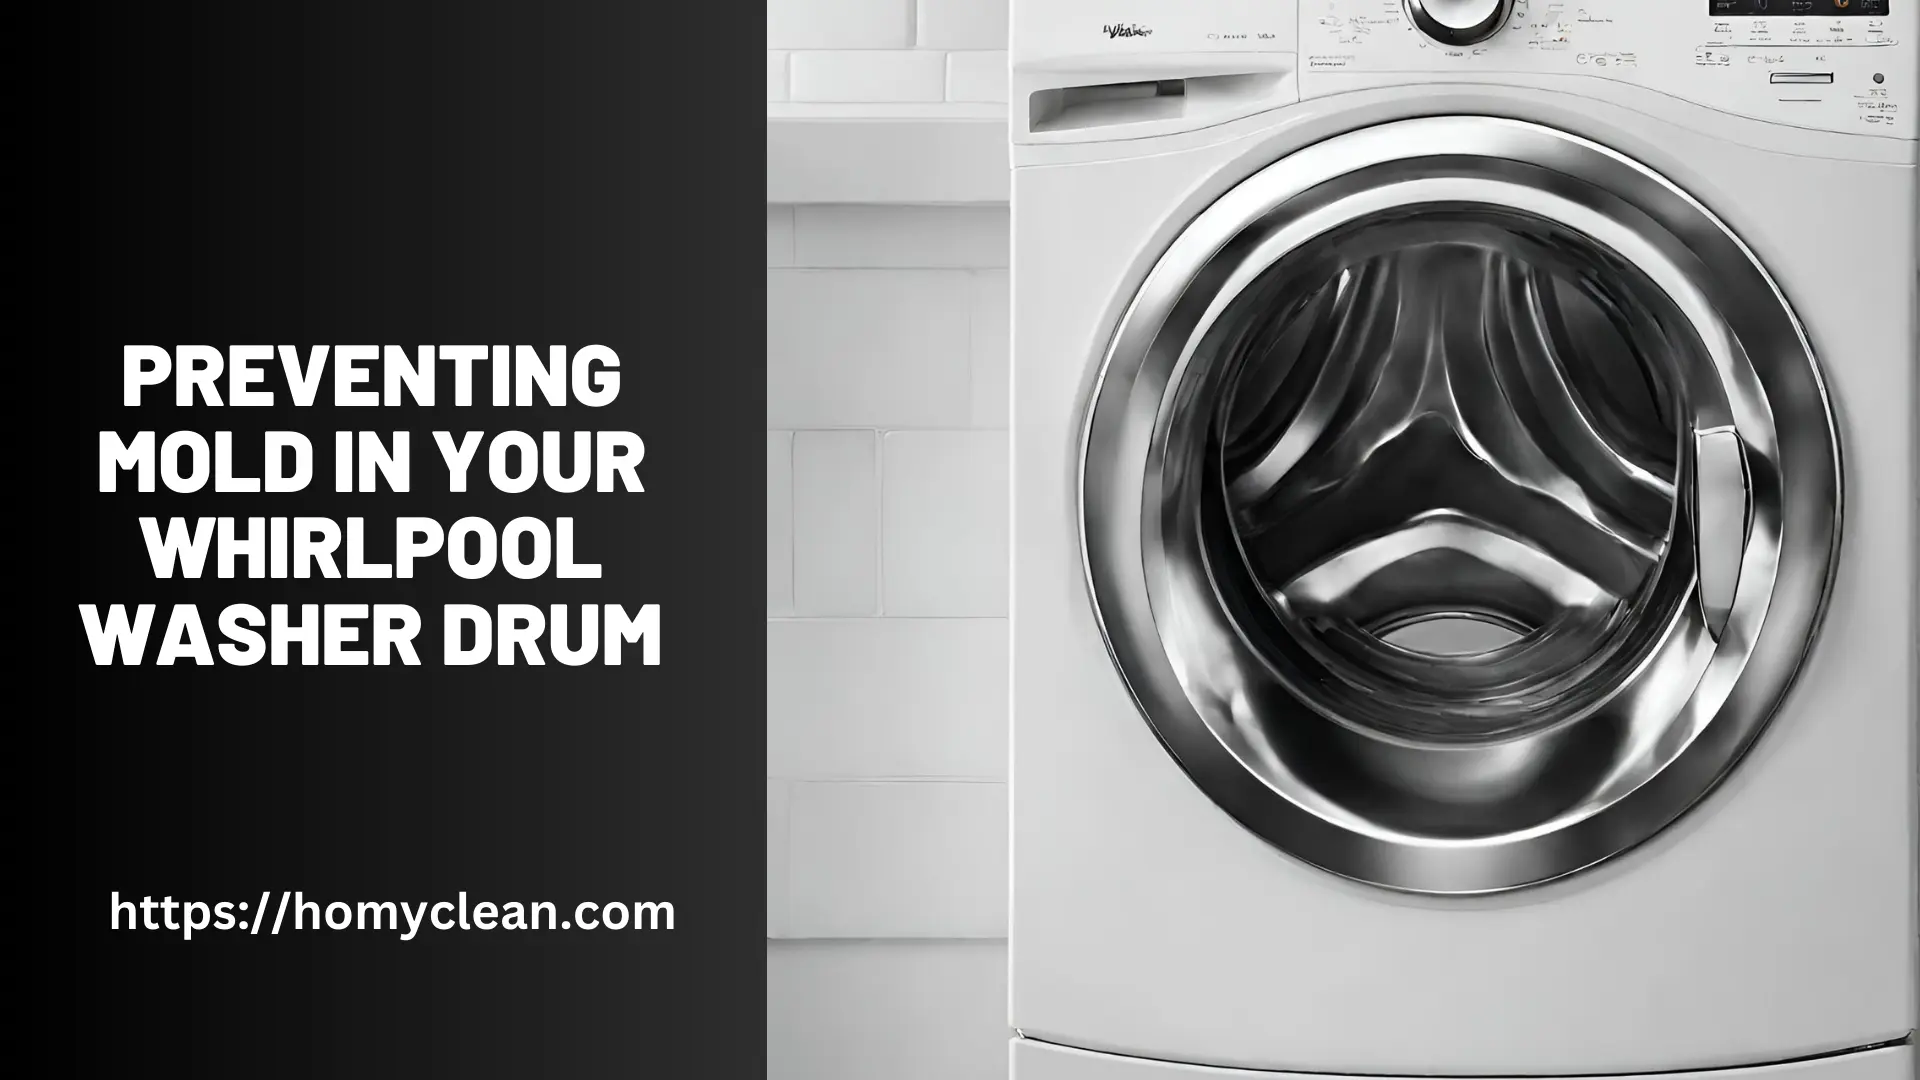 How to Prevent Mold in Whirlpool Washer Drum – Easy Tips and FAQs